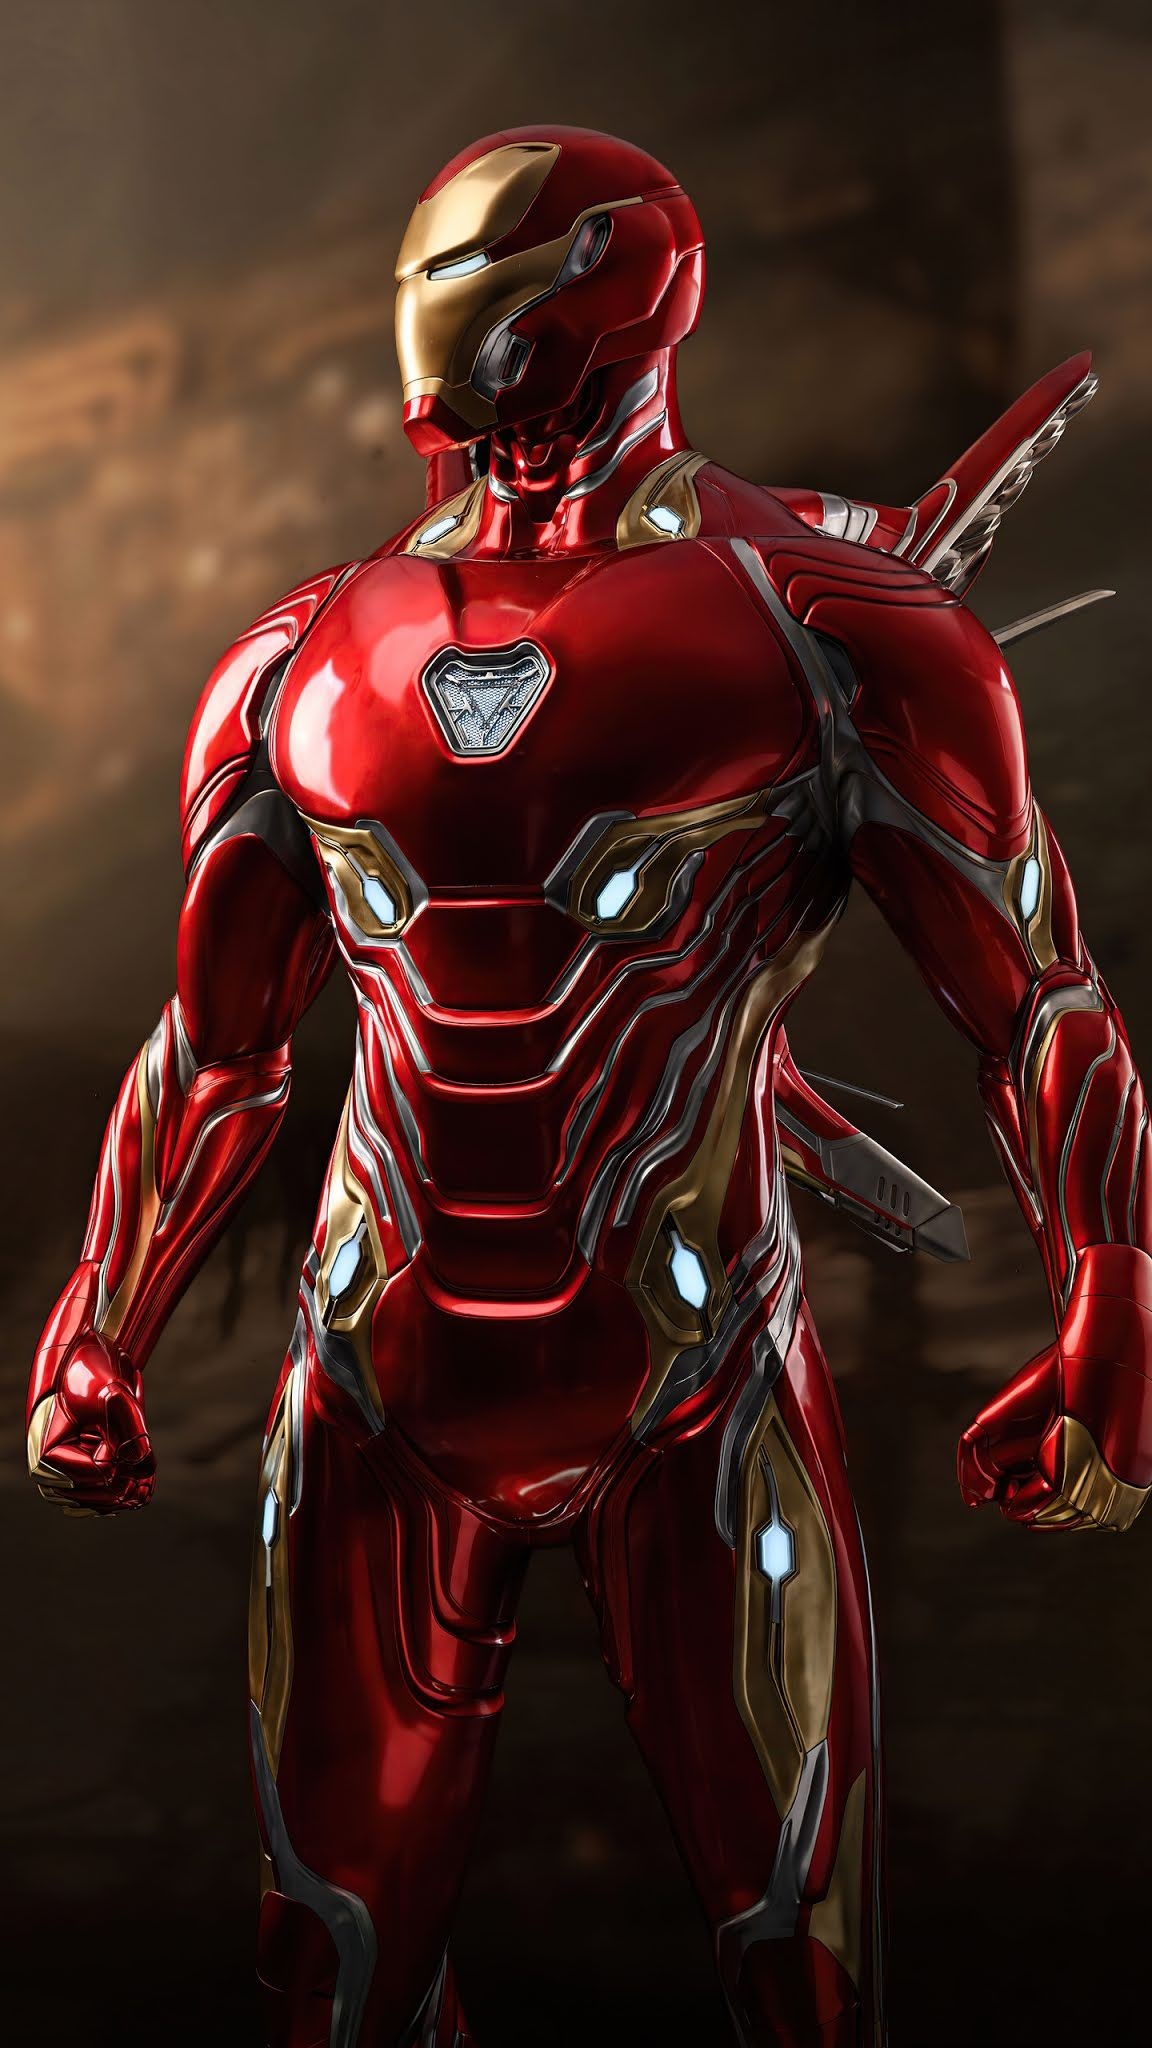 Iron Man: One of the original founding members and leaders of the Avengers team. 1160x2050 HD Wallpaper.